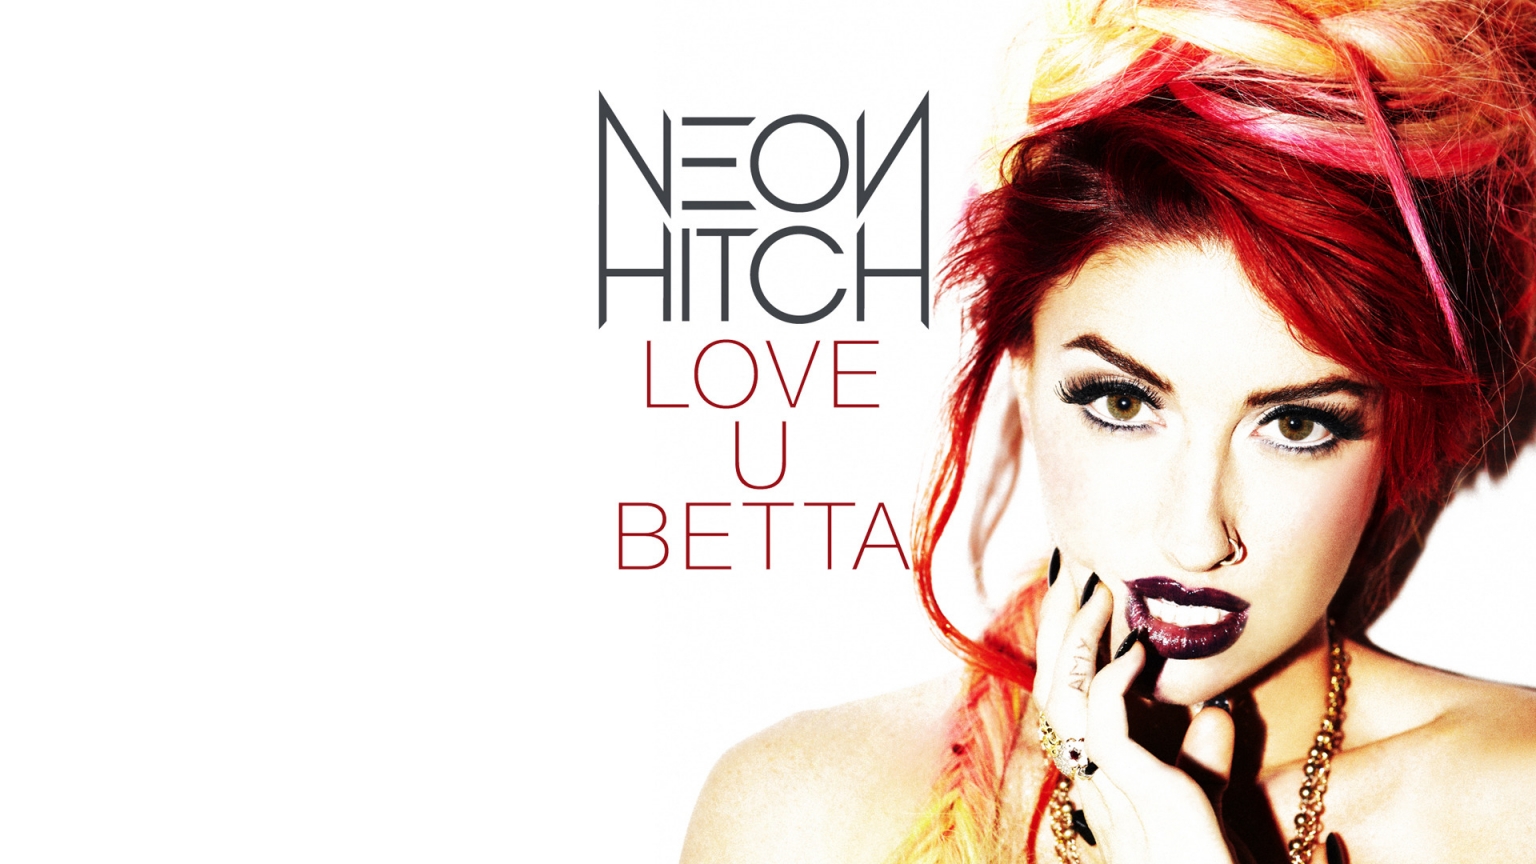 Beautiful Neon Hitch for 1536 x 864 HDTV resolution